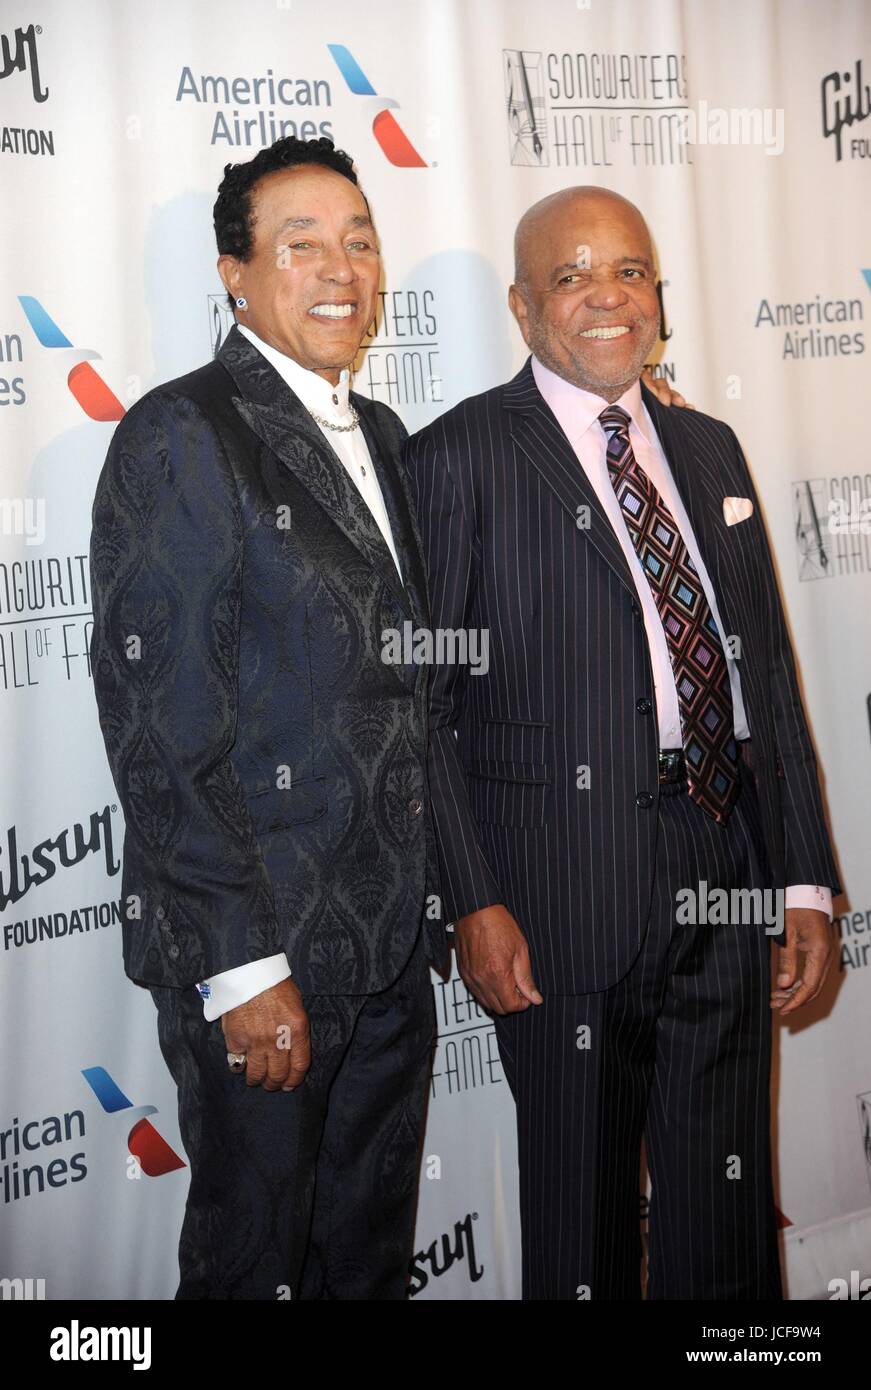 New York, NY, USA. 15th June, 2017. Smokey Robinson, Berry Gordy Jr at arrivals for Songwriters Hall Of Fame 2017 48th Annual Induction And Awards Gala, New York Marriott Marquis, New York, NY June 15, 2017. Credit: Kristin Callahan/Everett Collection/Alamy Live News Stock Photo